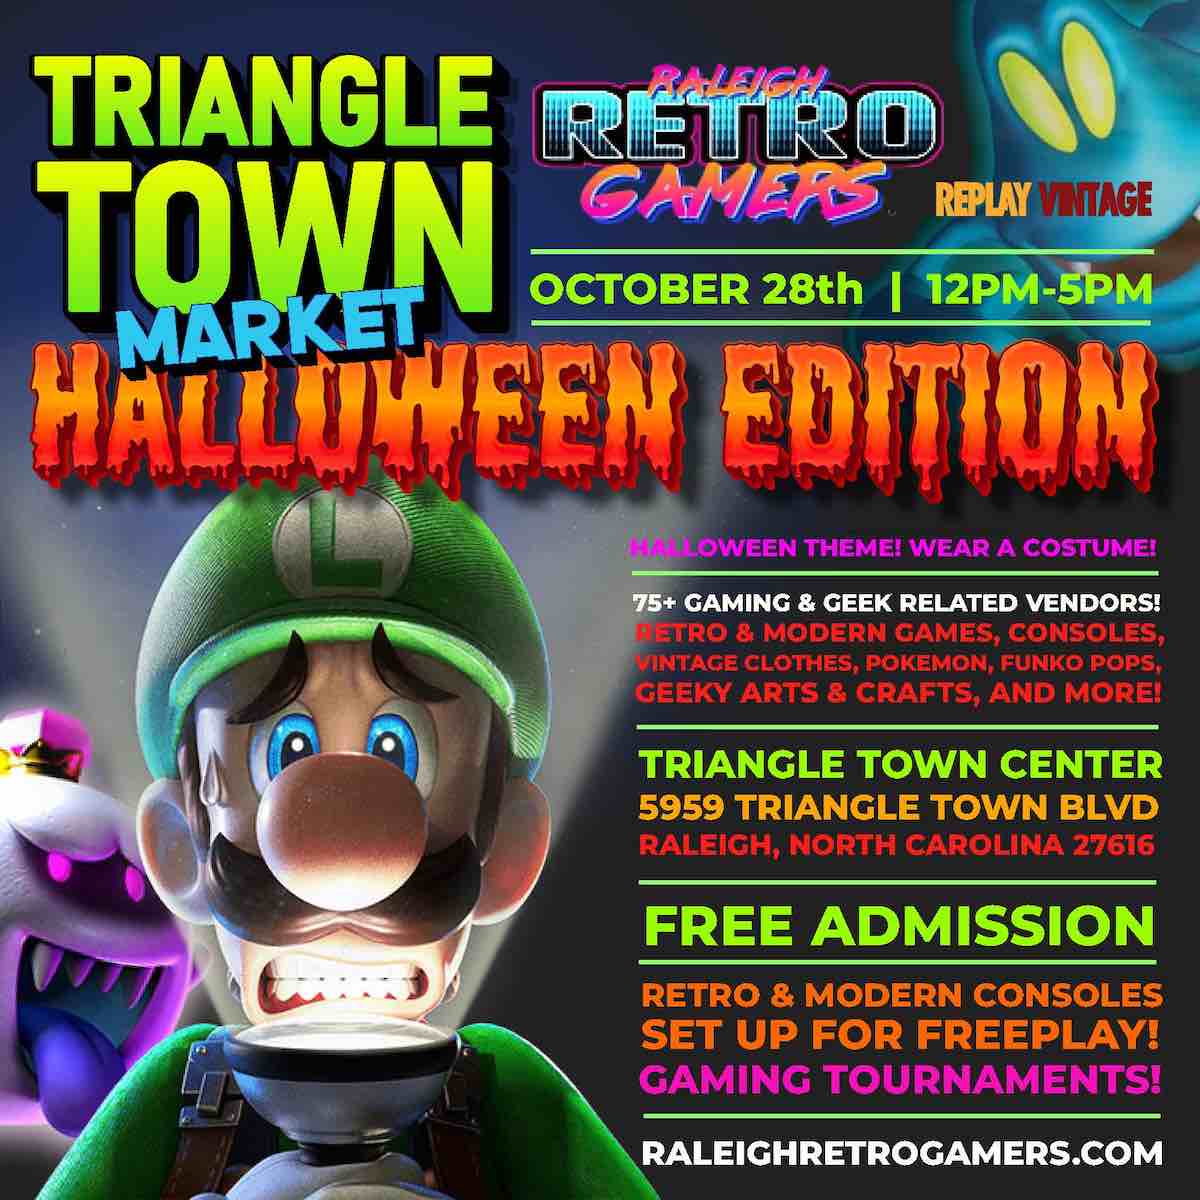 Raleigh Retro Gamers - Halloween Edition at Triangle Town Market Oct 28